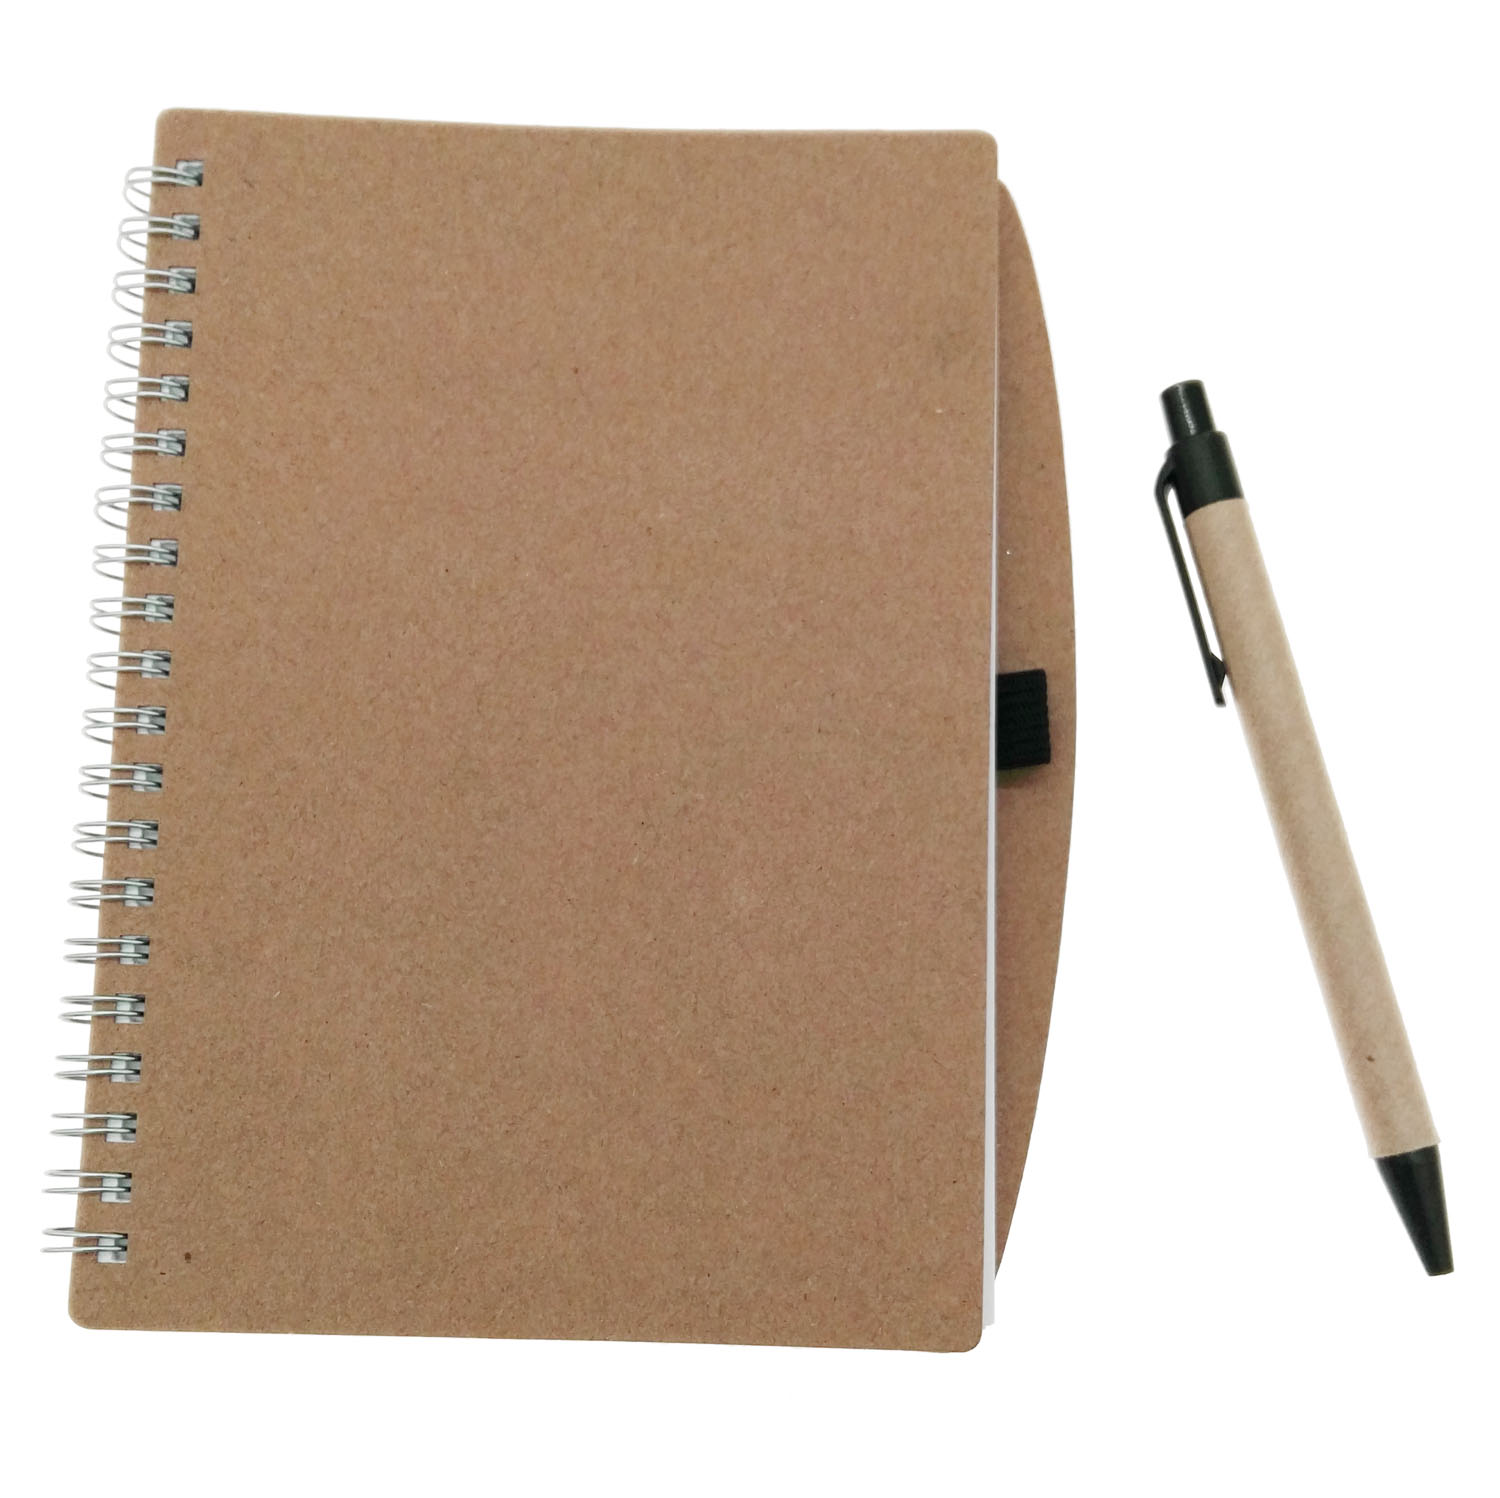 GL-AAA1201 4.5” x 7” Recycled Notebook with Pen